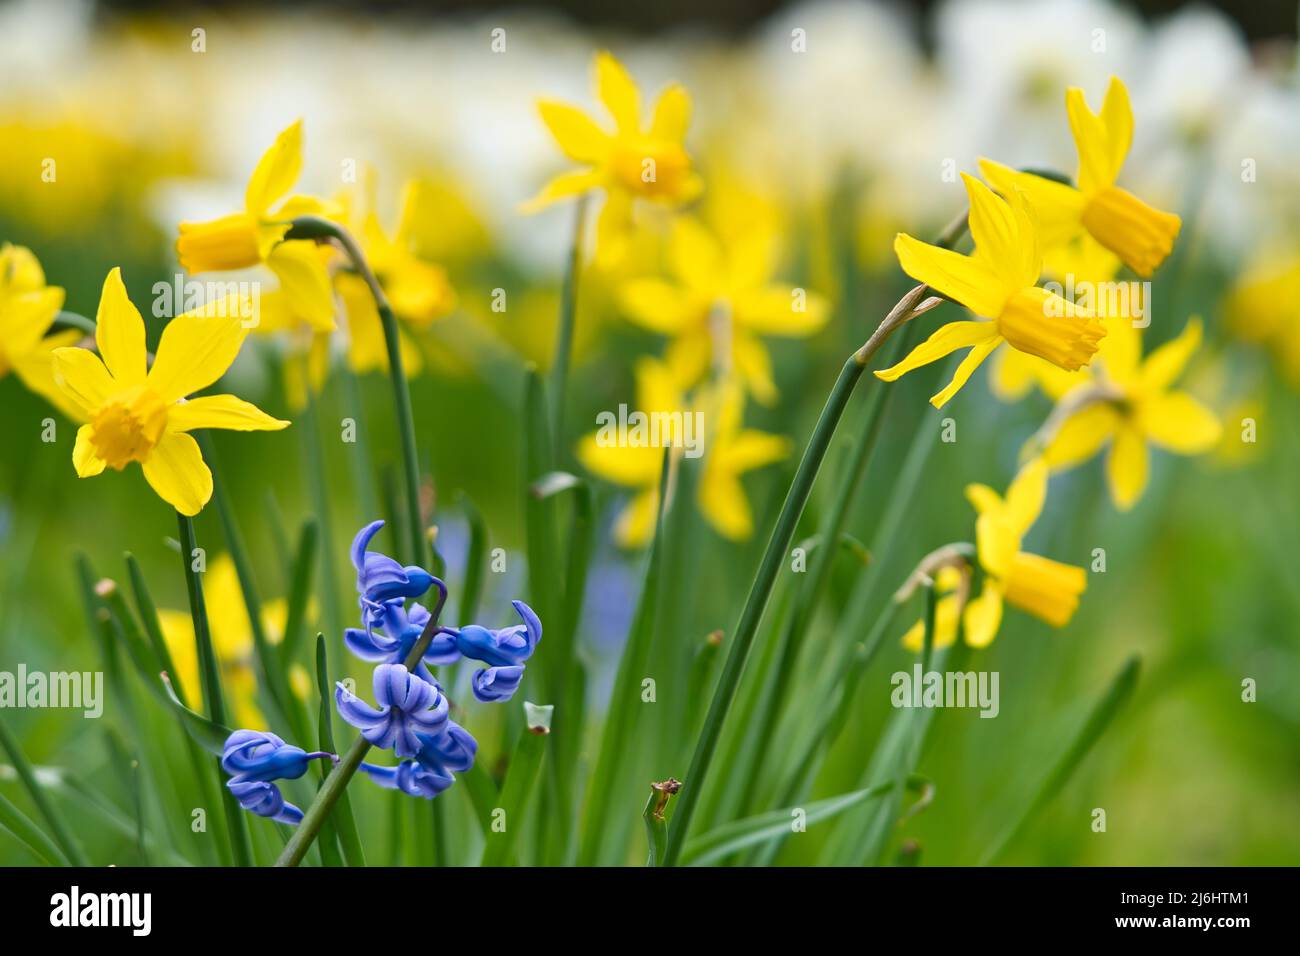 Daffodils at Easter time on a meadow. Yellow white flowers shine against the green grass. Early bloomers that announce the spring. Plants photo Stock Photo